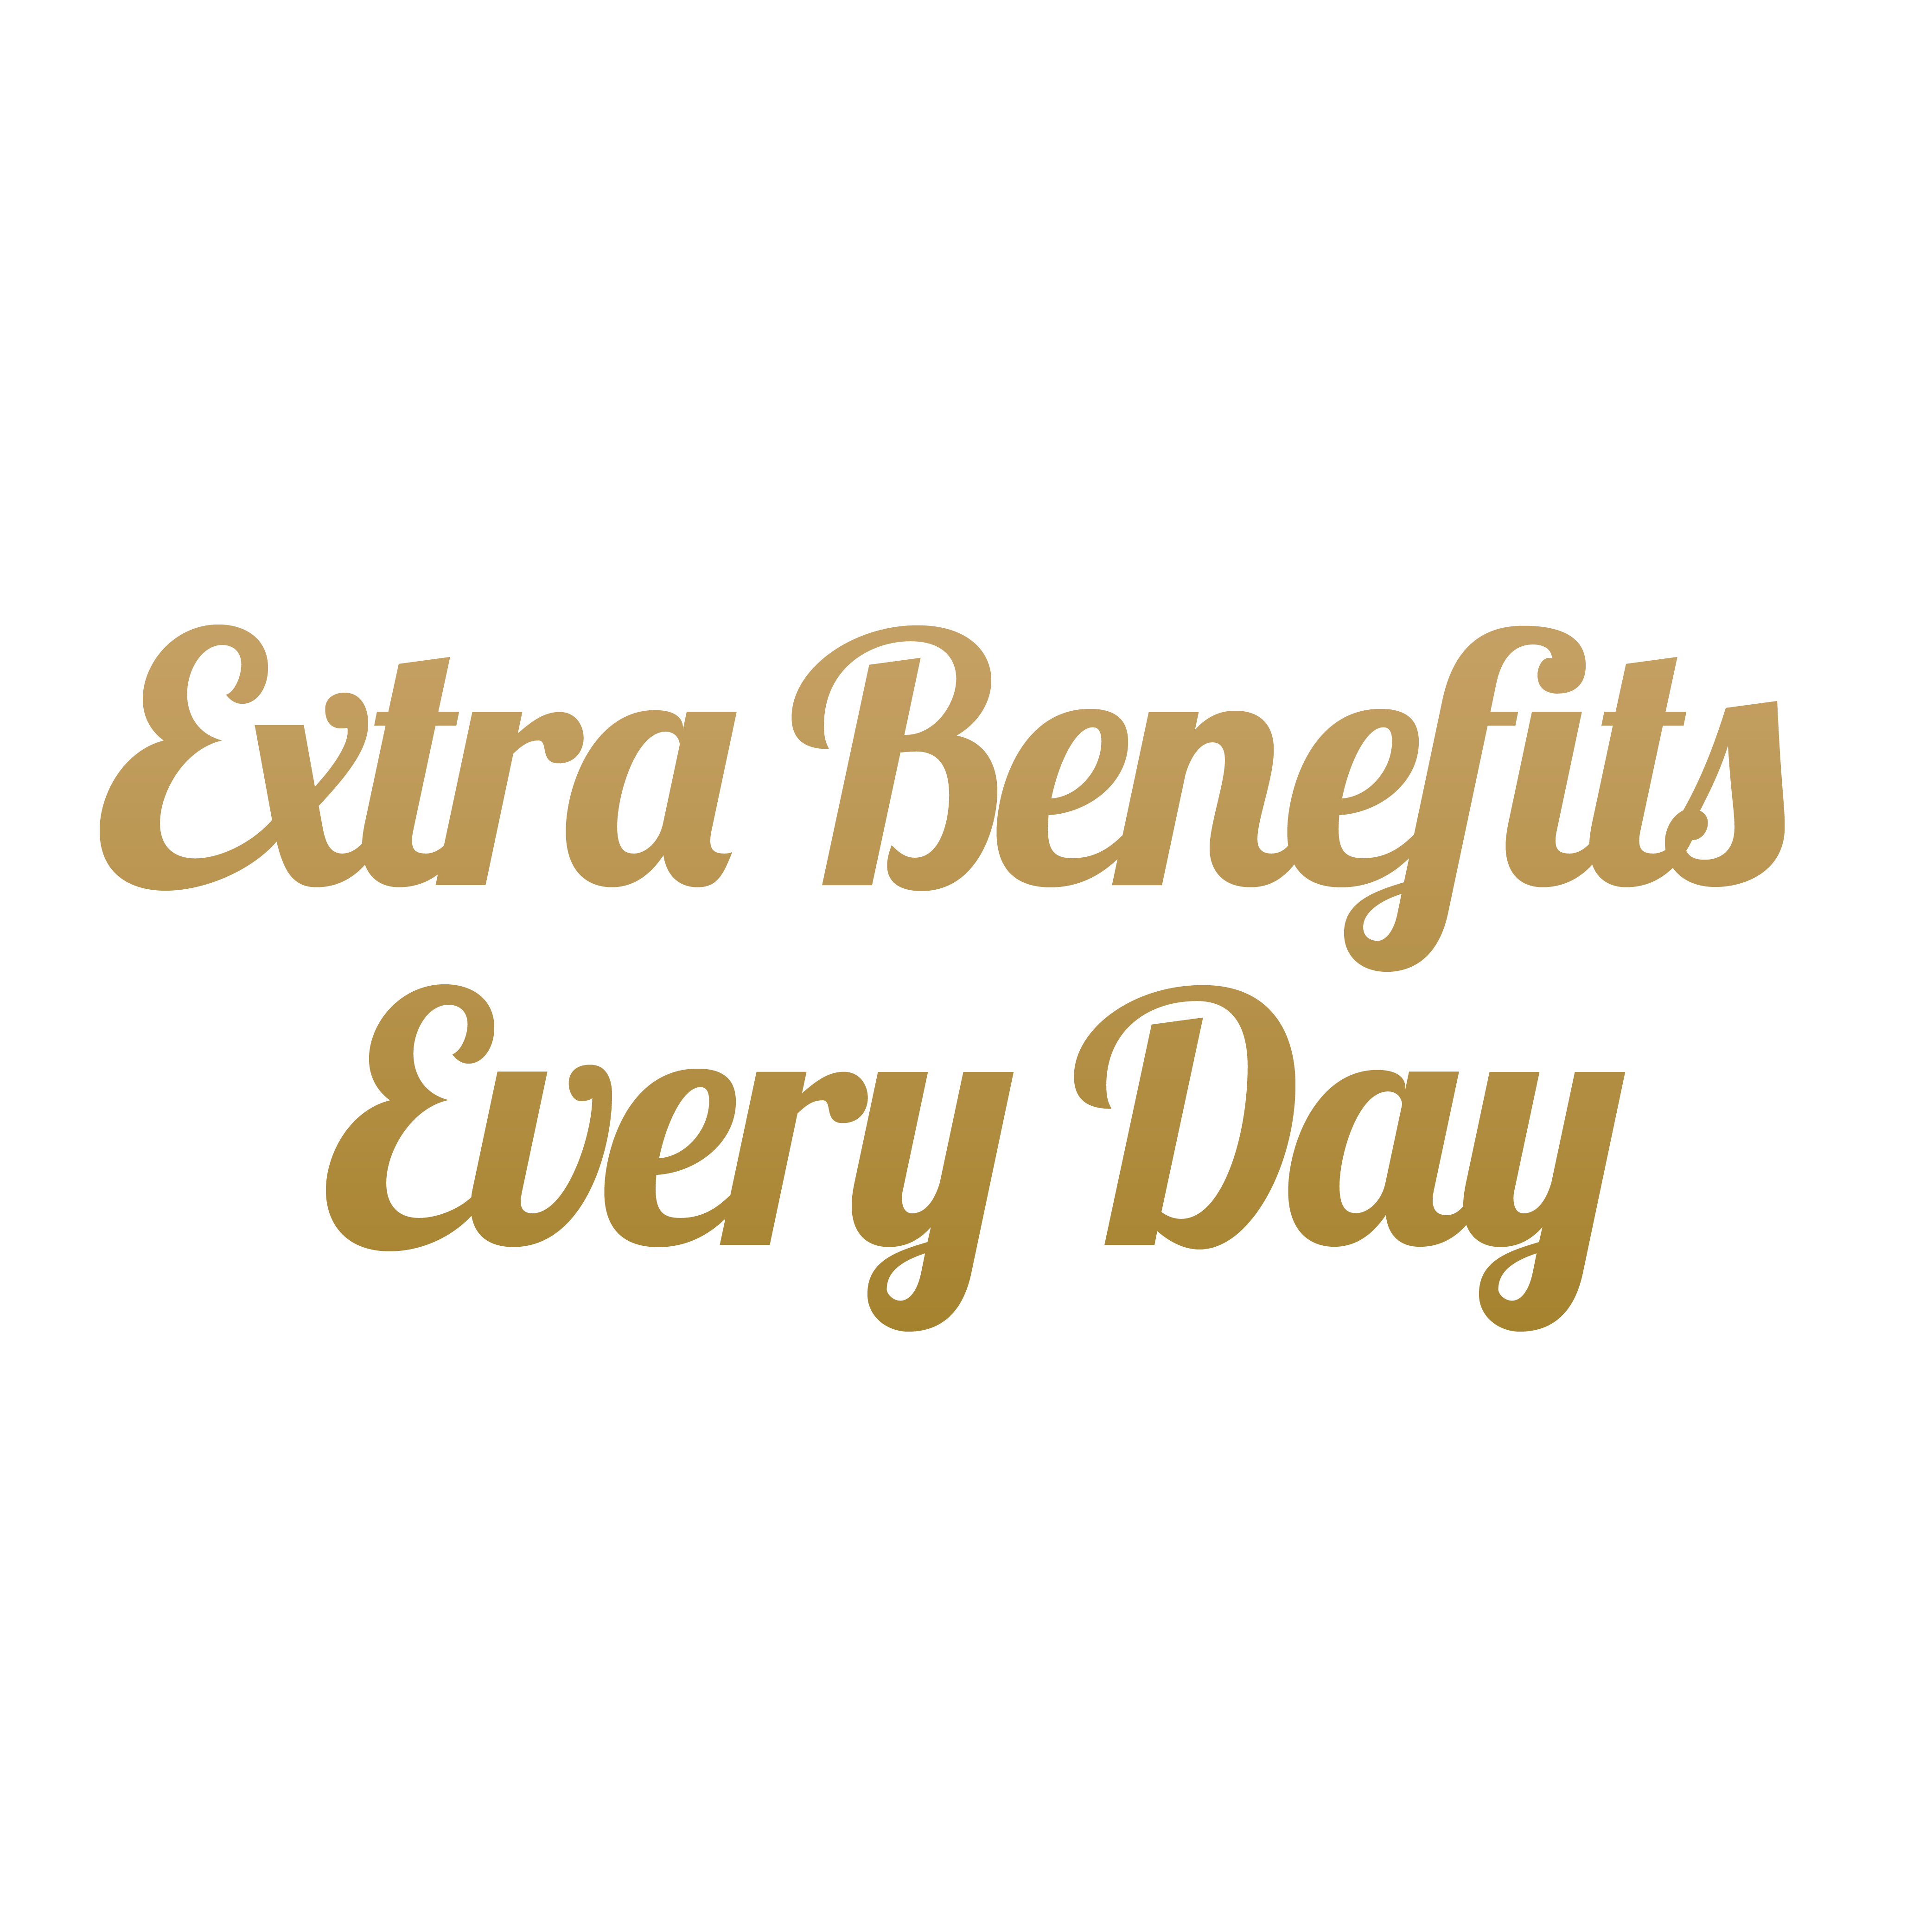 Extra Checking Account Benefits